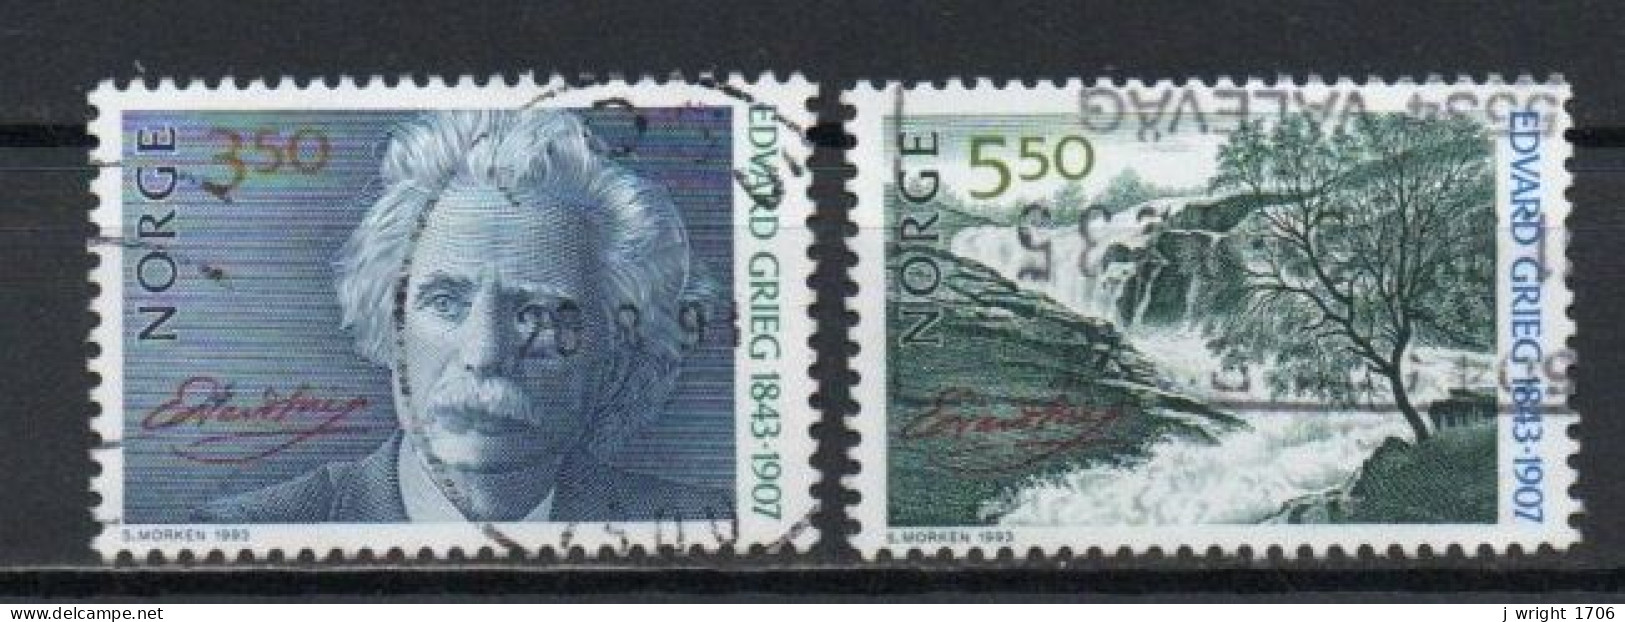 Norway, 1993, Edvard Grieg, Set, USED - Used Stamps